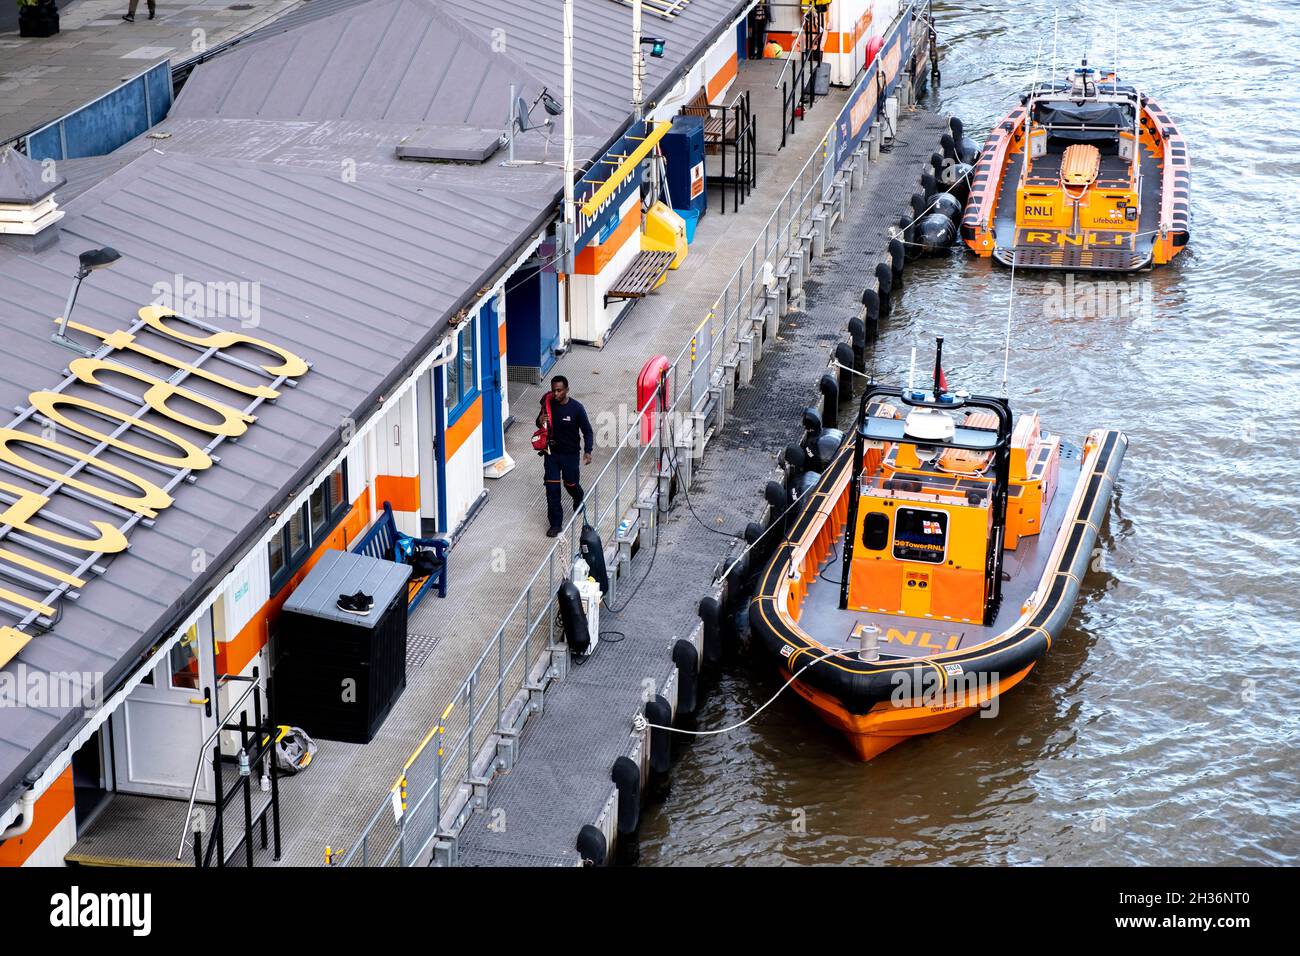 River Thames Royal Lifeboat National Lifeboat Institution Station Waterloo Bridge London With Two Rescue Boats Or Craft Tied To Dockside Moorings Stock Photo